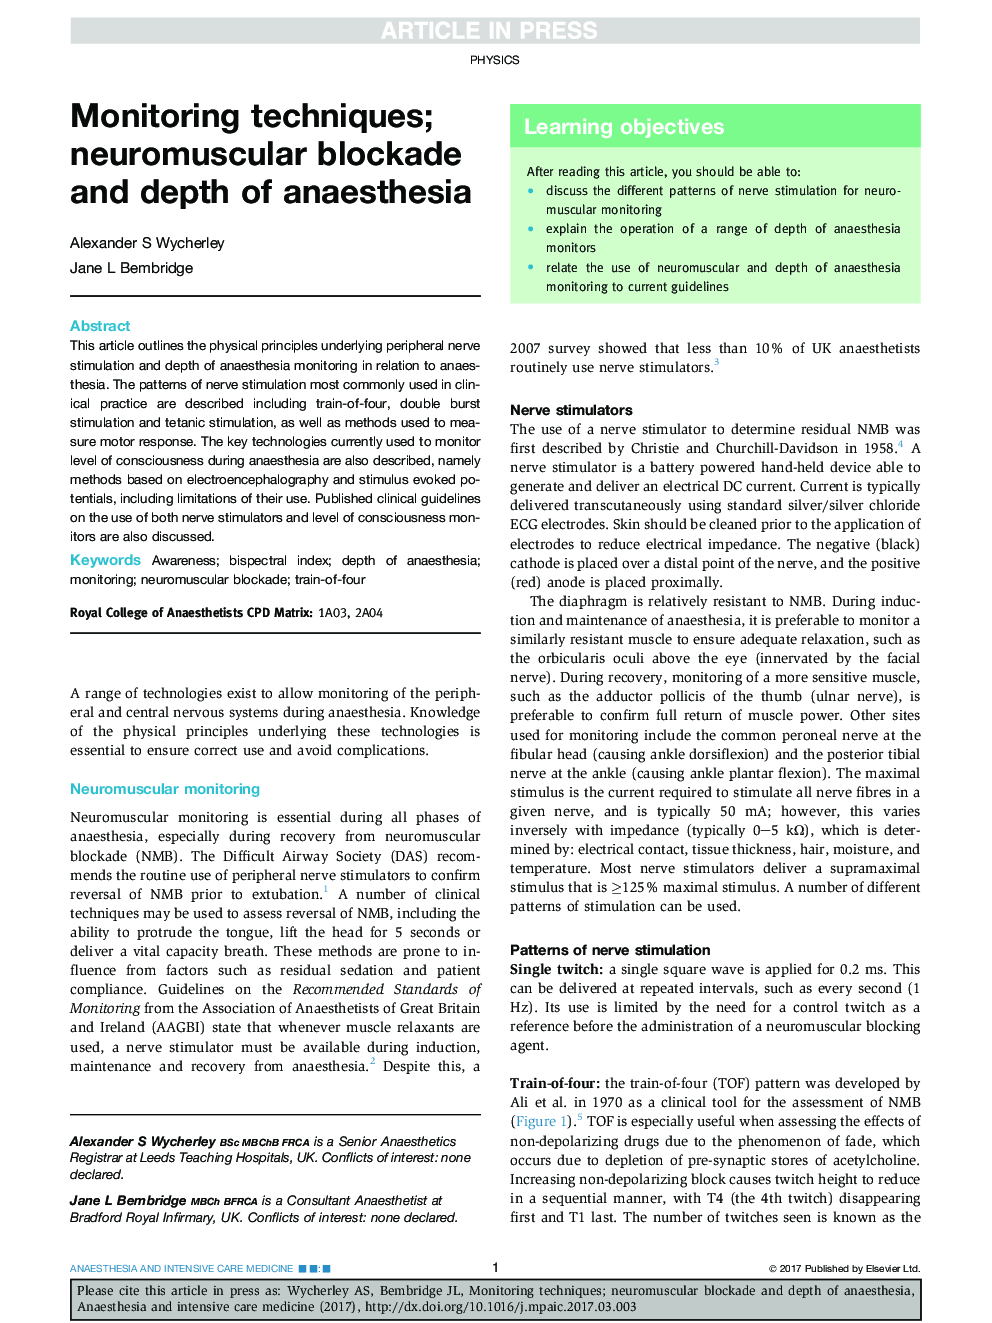 Monitoring techniques; neuromuscular blockade and depth of anaesthesia